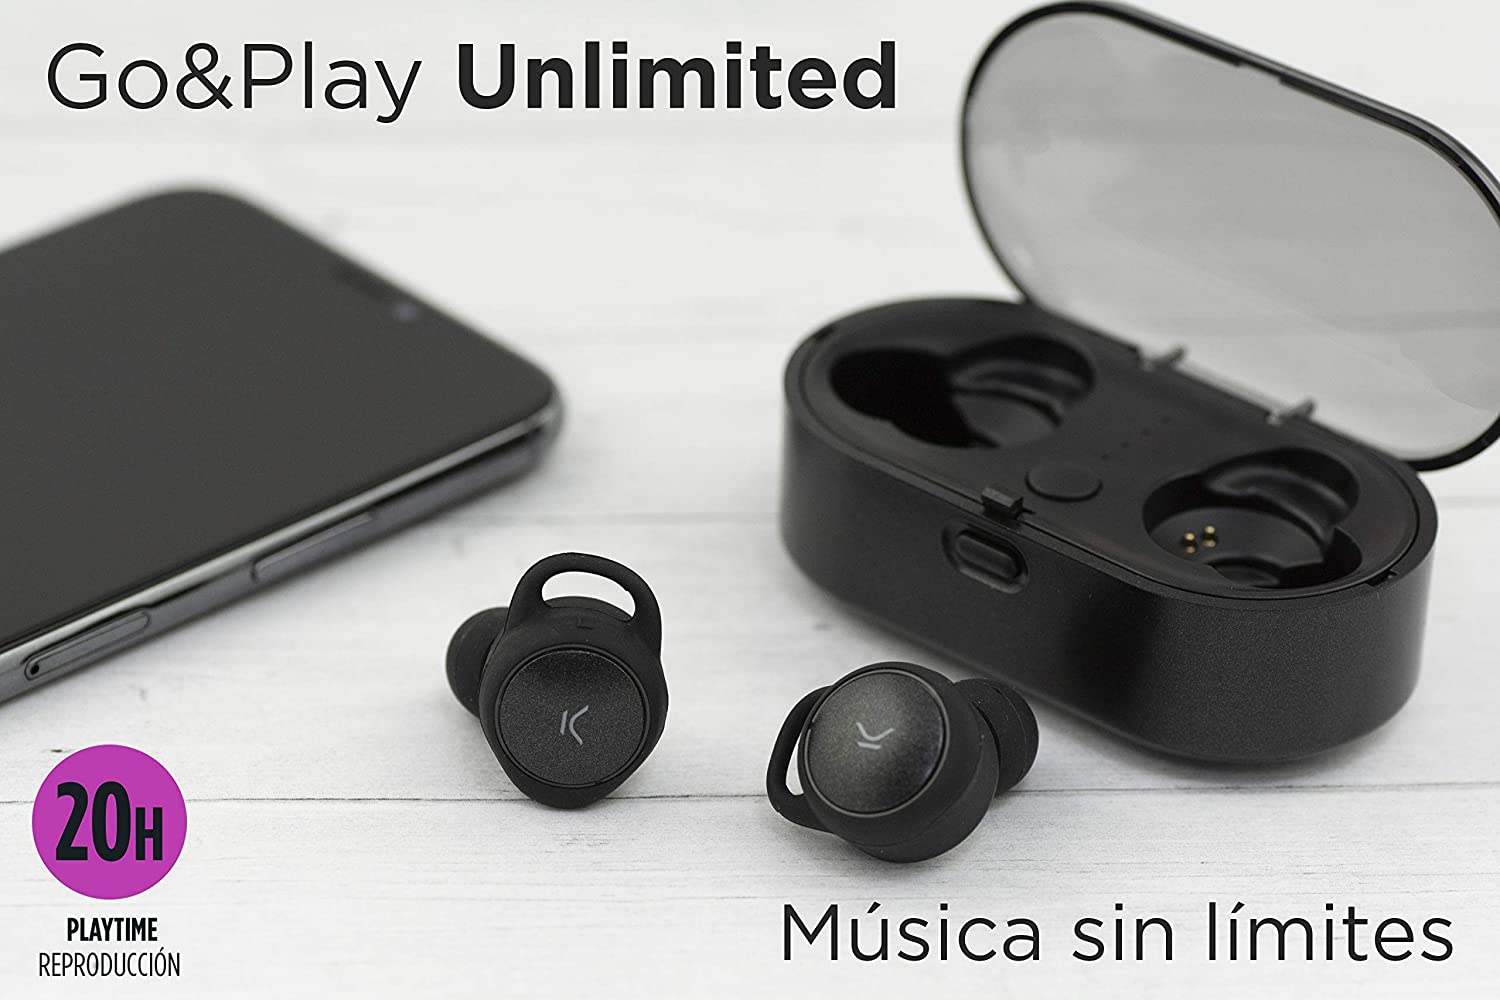 Auriculares Inalambricos Go&Play Unlimited 